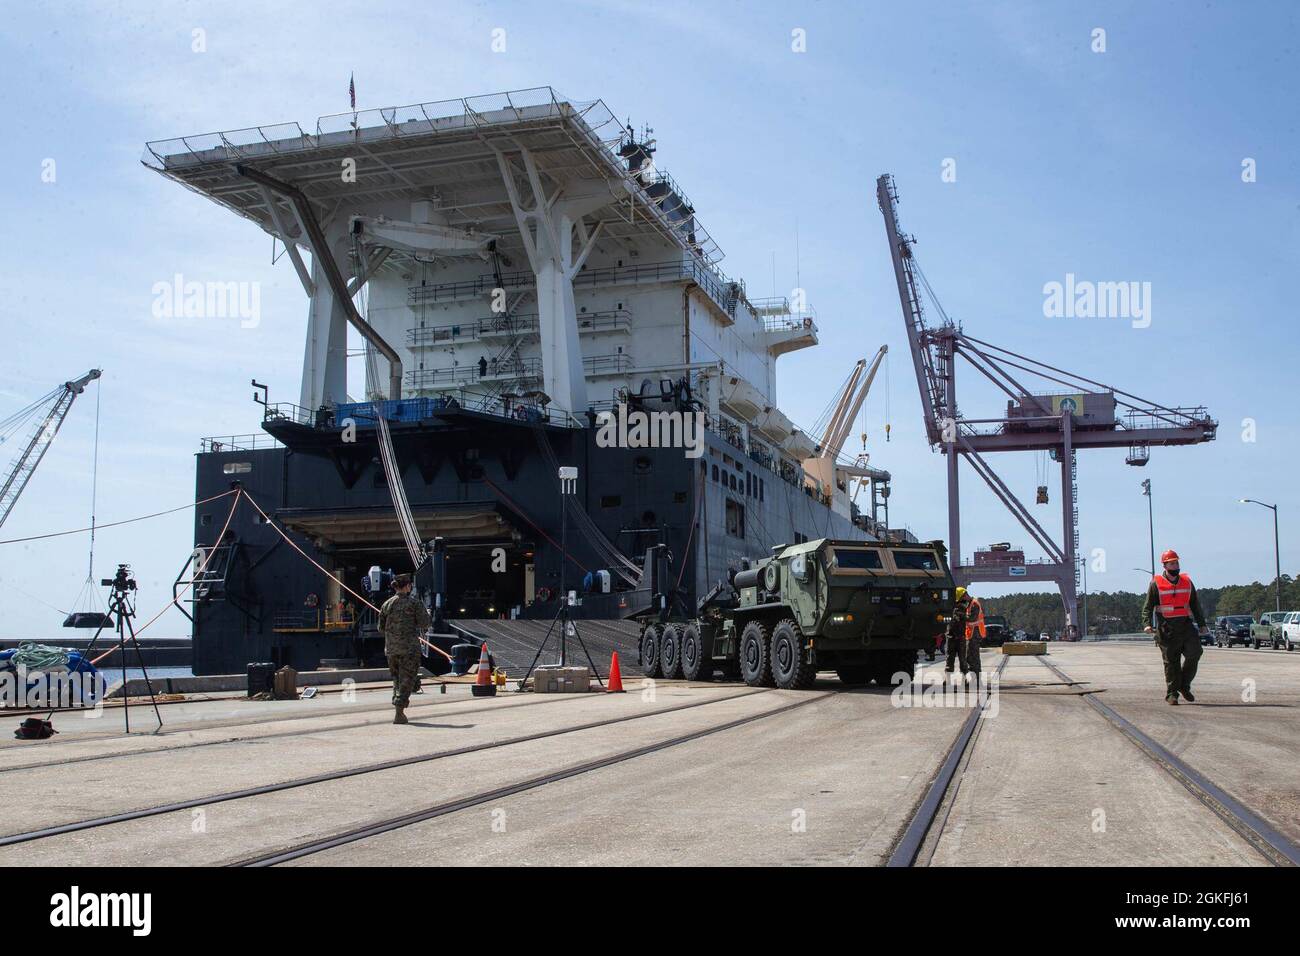 U.S. Marines with II Marine Expeditionary Force offload a medium tactical vehicle replacement from the well deck of the USNS PFC Dewayne T. Williams (T-AK-3009) during exercise Dynamic Cape (DC 21.1) on April 9, 2021 at the Military Ocean Terminal Sunny Point, North Carolina. DC 21.1 is a command and control exercise simulating a contested environment to enhance operational readiness between II Marine Expeditionary Force partner nations and other Department of Defense entities. Stock Photo